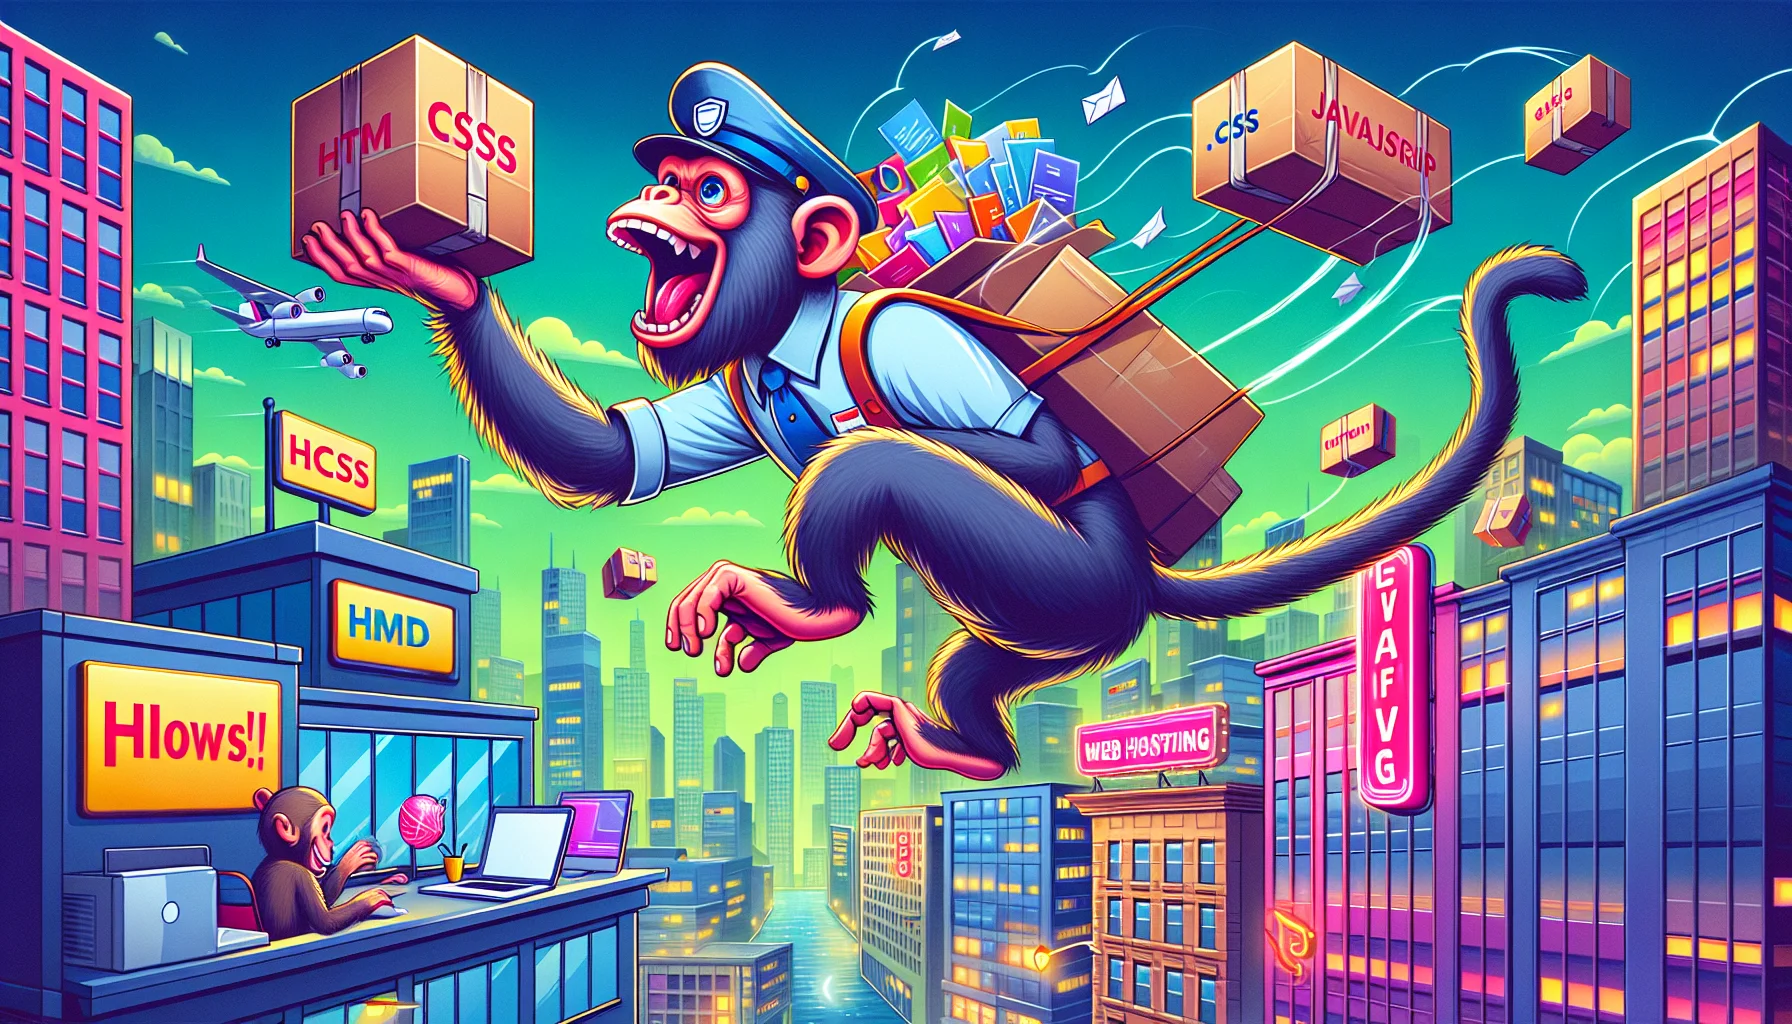 Design a humorous and lifelike scenario depicting a generic website builder. Display a primate, dressed in a postman uniform, enthusiastically delivering packages labeled with technological terms such as 'HTML', 'CSS', 'JavaScript', and 'Web Hosting'. This scene is set in a vibrant cityscape with tall buildings and neon signs advertising digital services. Show this playful primate hopping from building to building, throwing packages down to happy customers waiting below with laptops open, ready to build their own websites.